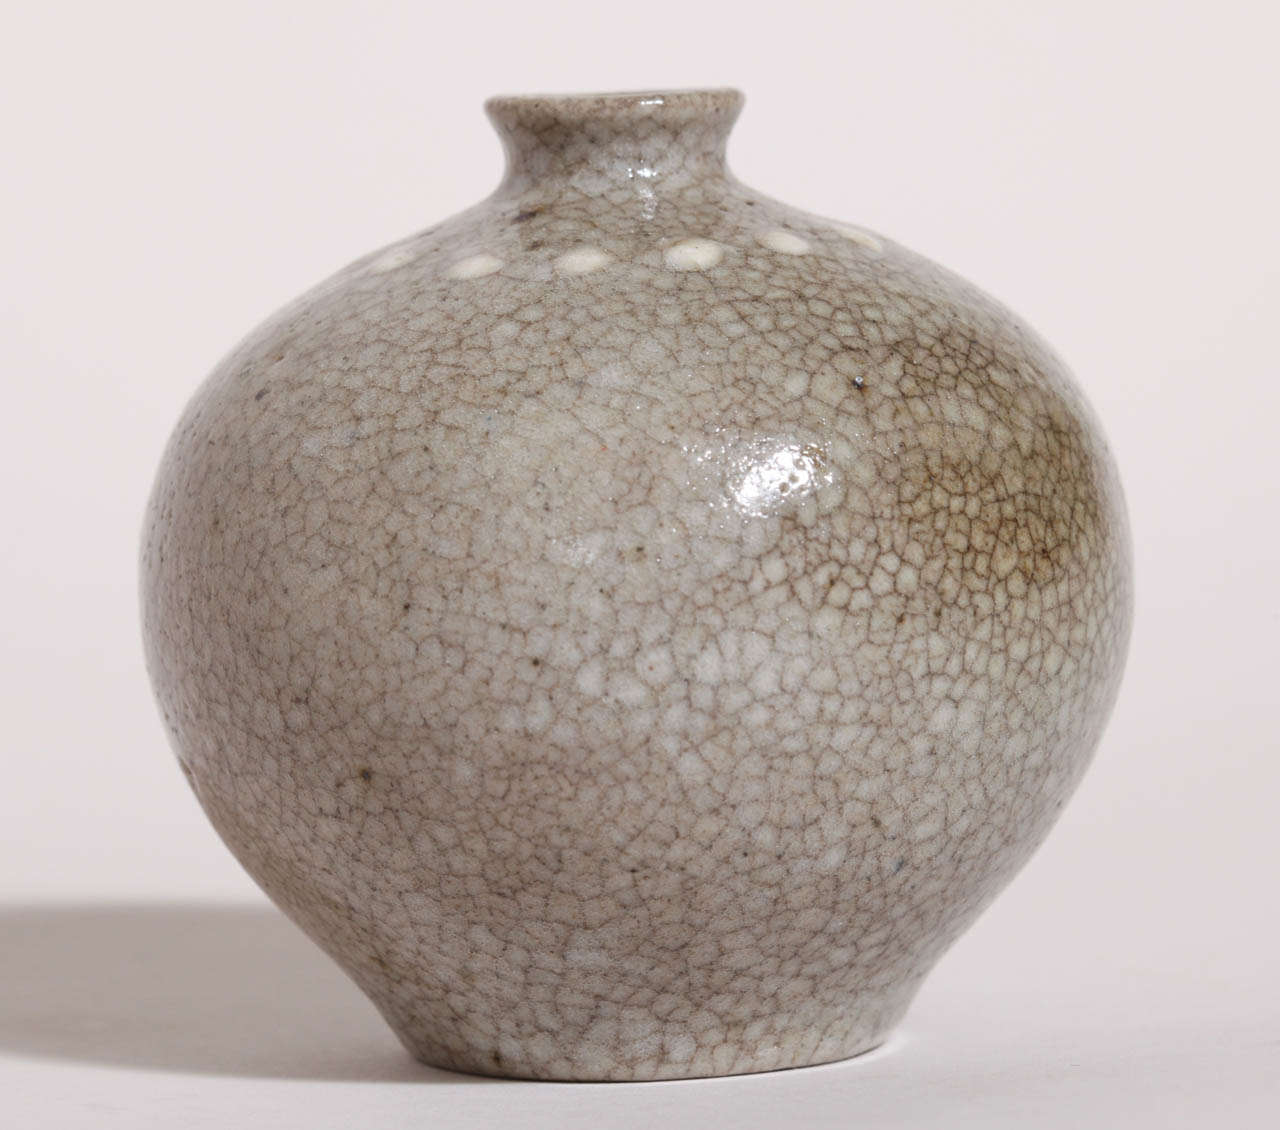 Spherical stoneware vase on a small foot with a flared neck in craquelure gray celadon and with white enamel beads around the body superiorly.
Signed: 